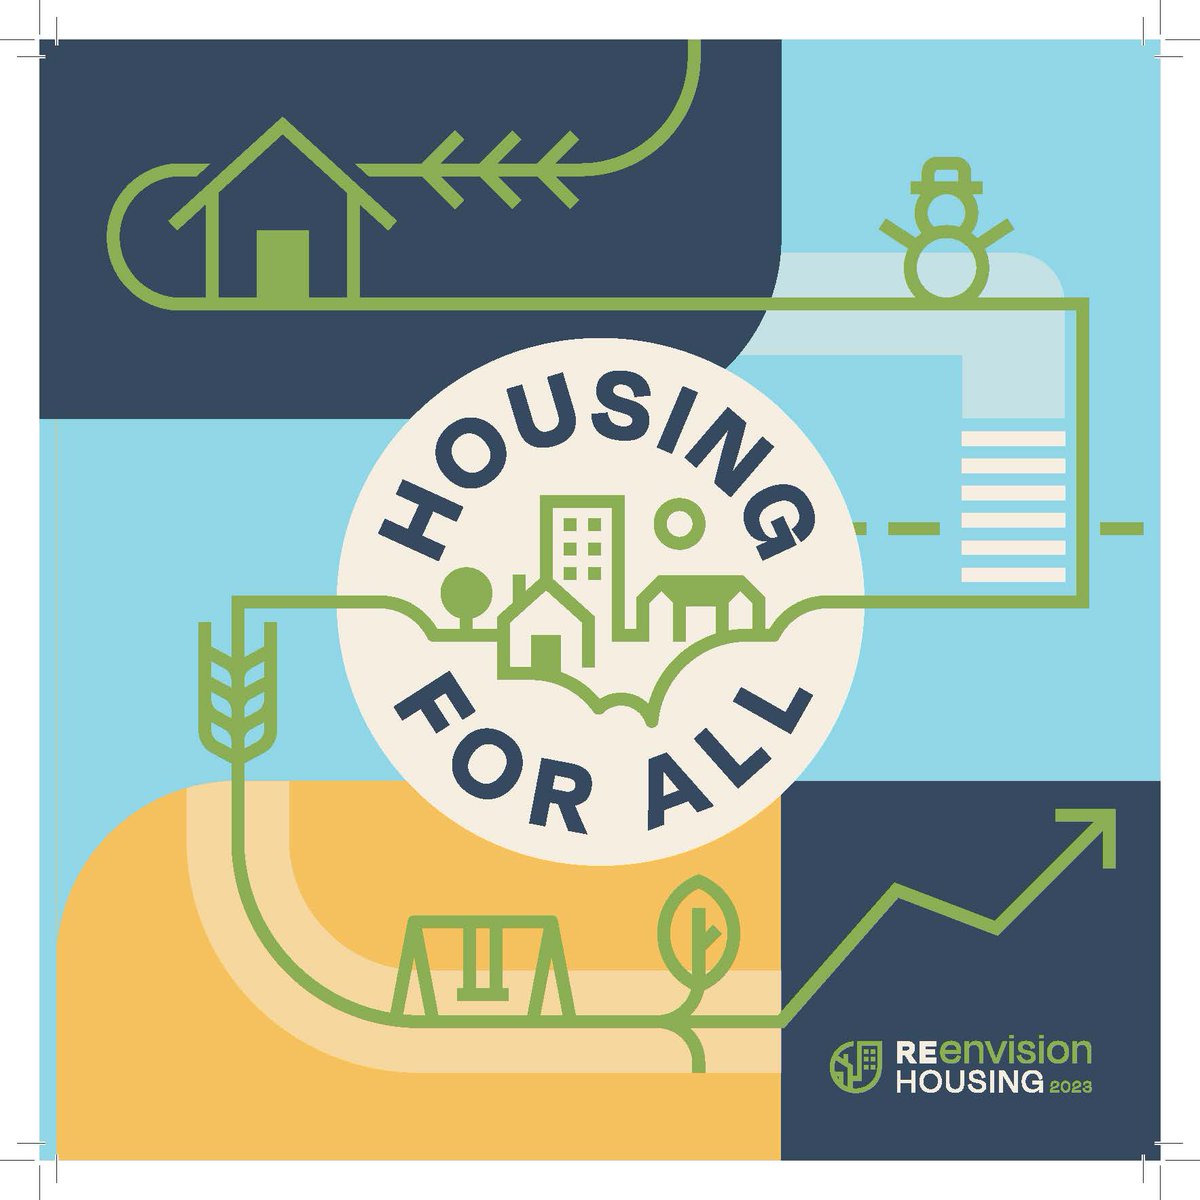 Missed the #REenvisionHousing Symposium, or do you want to watch some other sessions? Now's your chance! Check out ow.ly/zcqv50Q8VnH & learn how experts & leaders have come together to seek out solutions to build a better future of housing in #YEGMetro. #HousingForAll